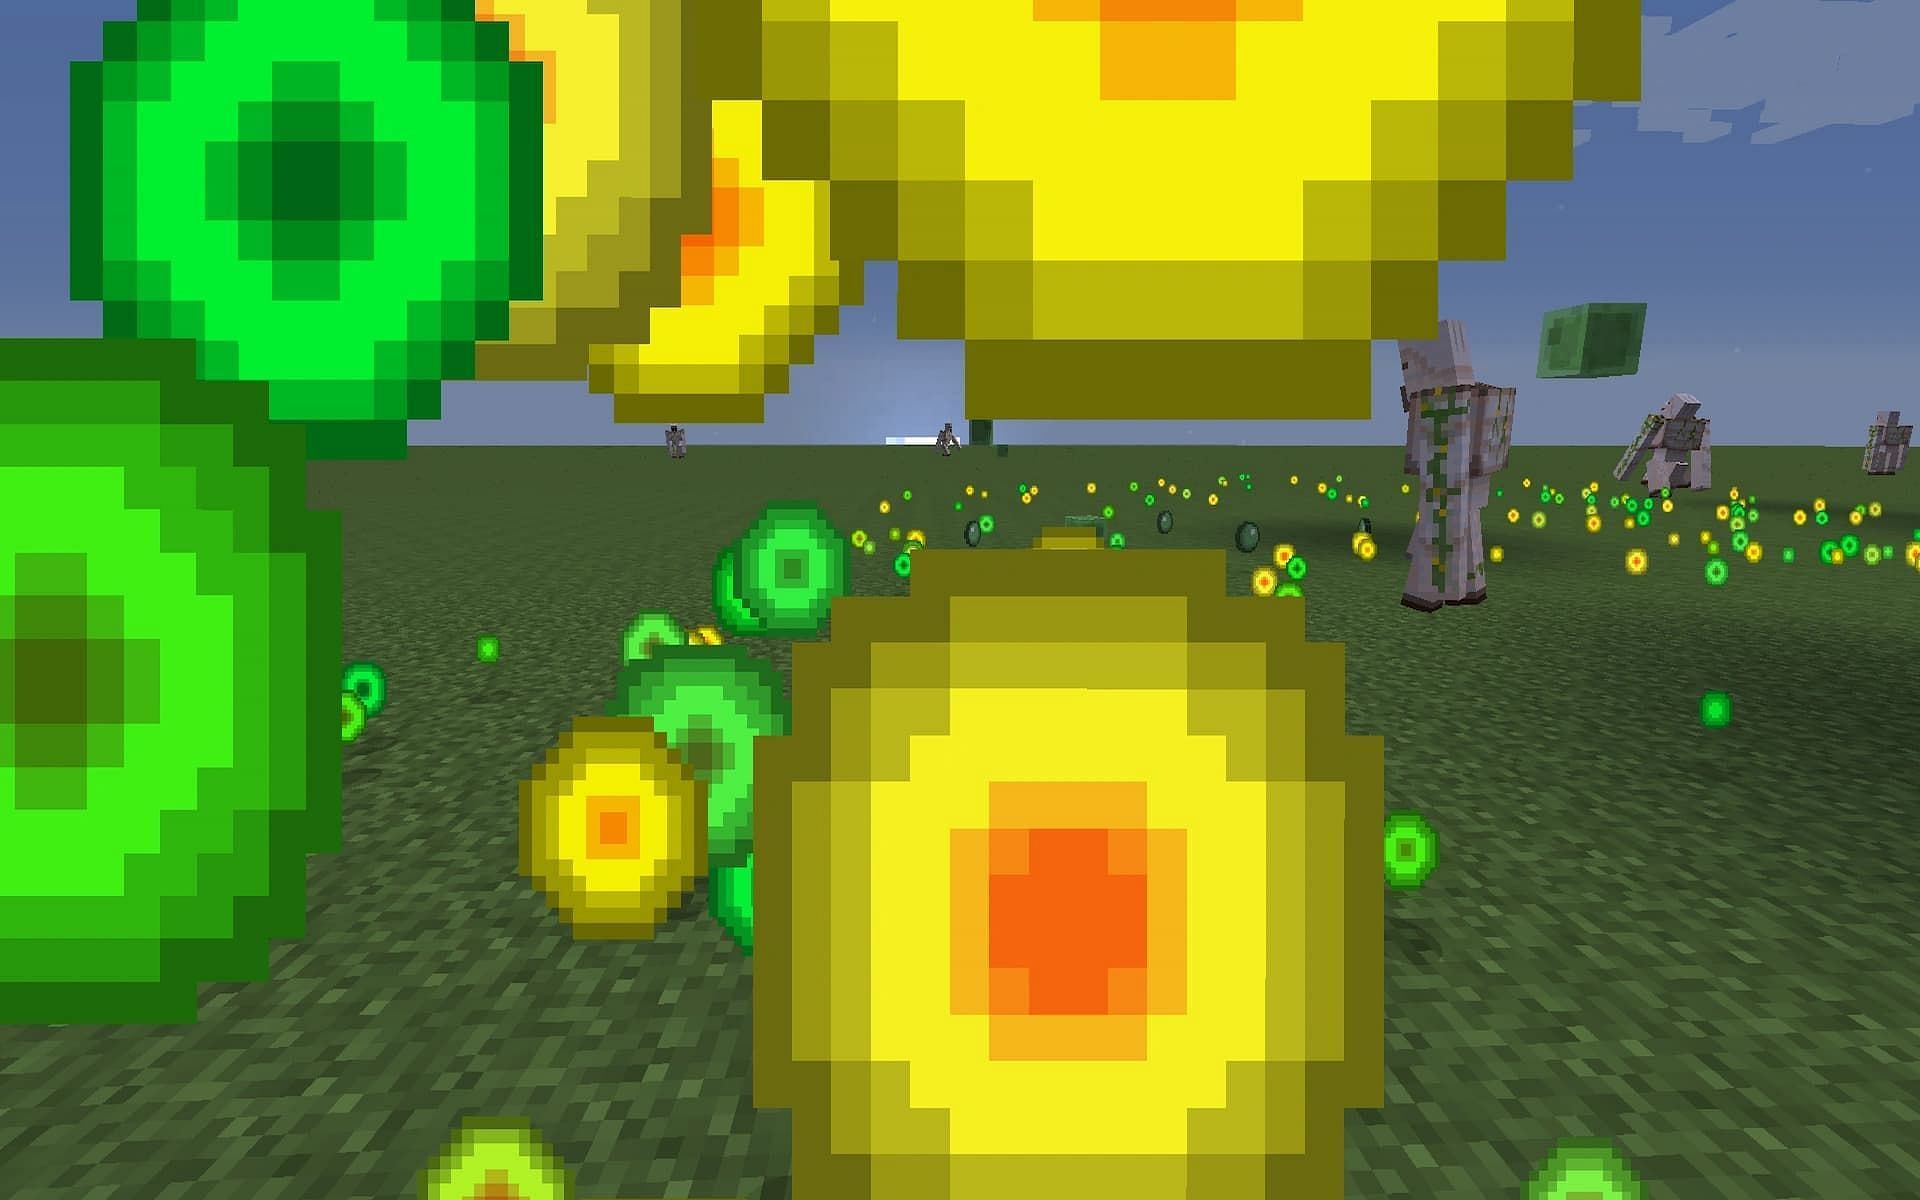 A shower of XP bubbles falls on a field of iron golems in Minecraft